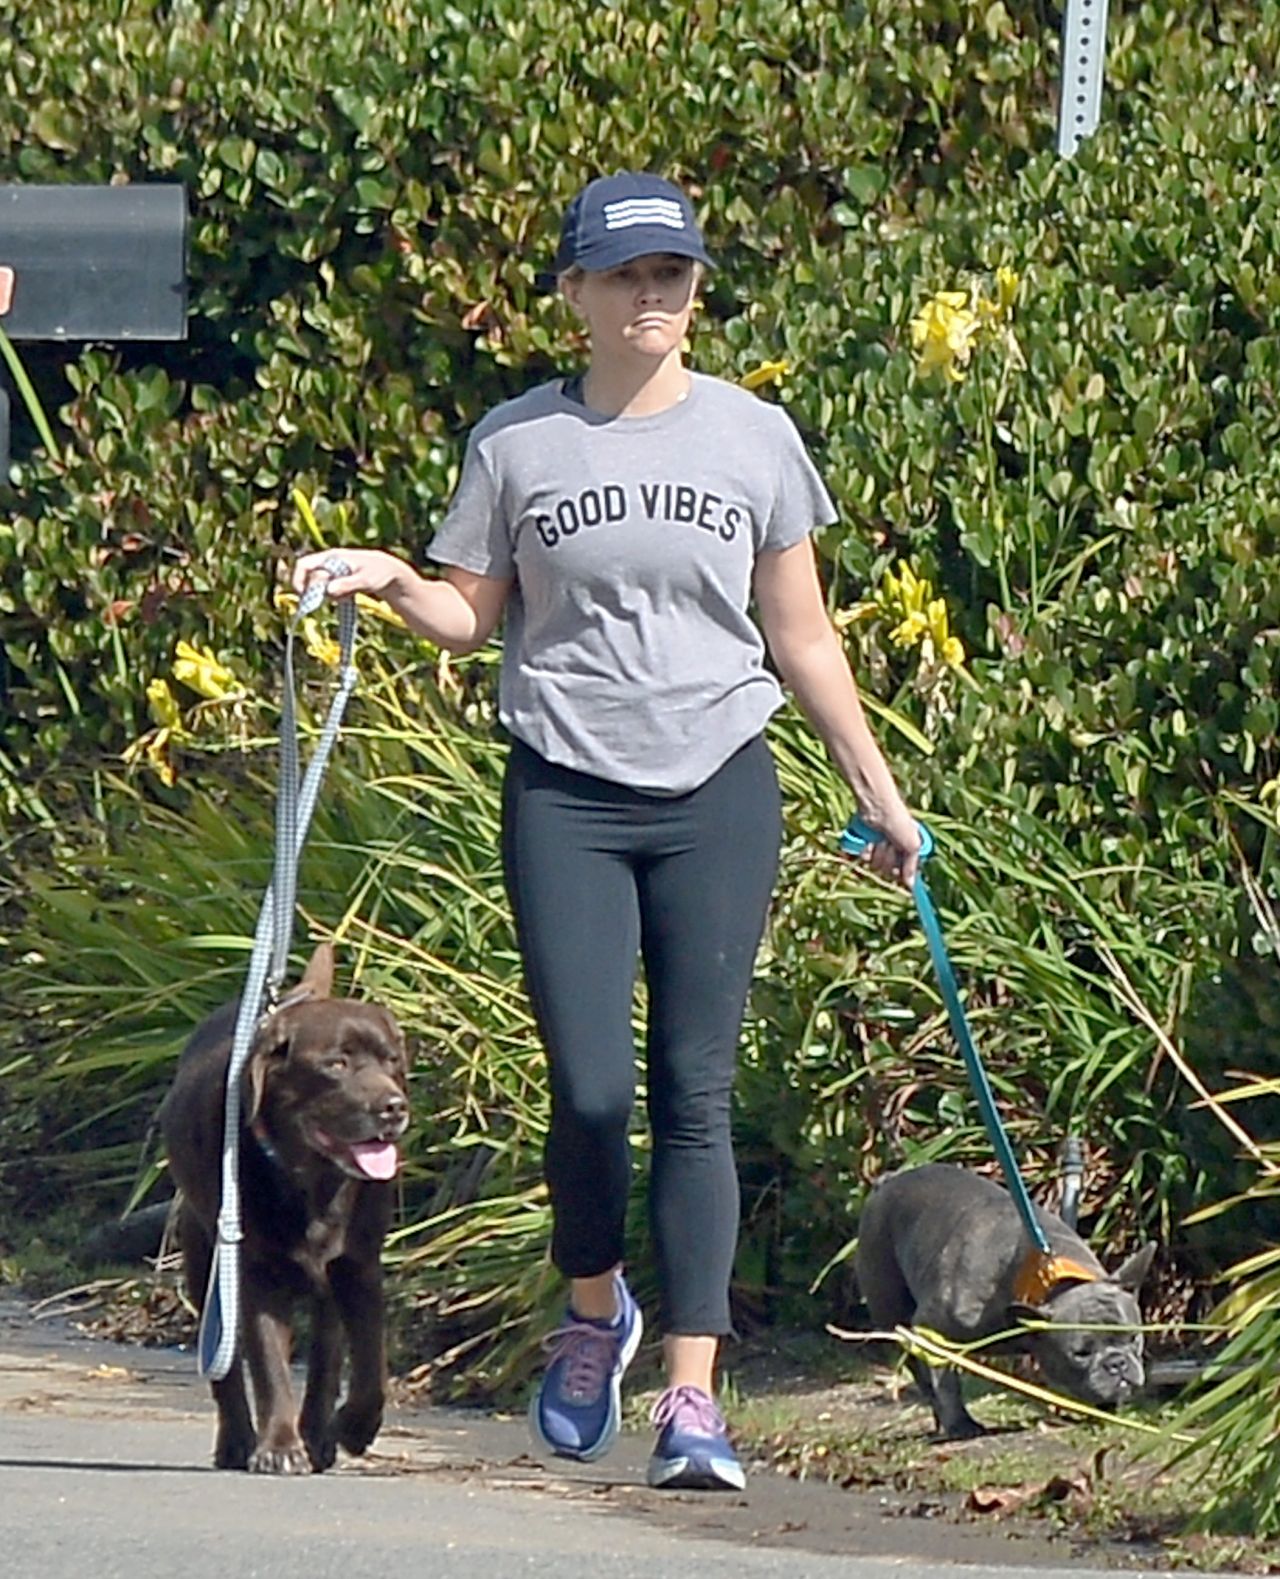 reese-witherspoon-taking-her-dogs-out-for-a-walk-10-29-2018-1.jpg